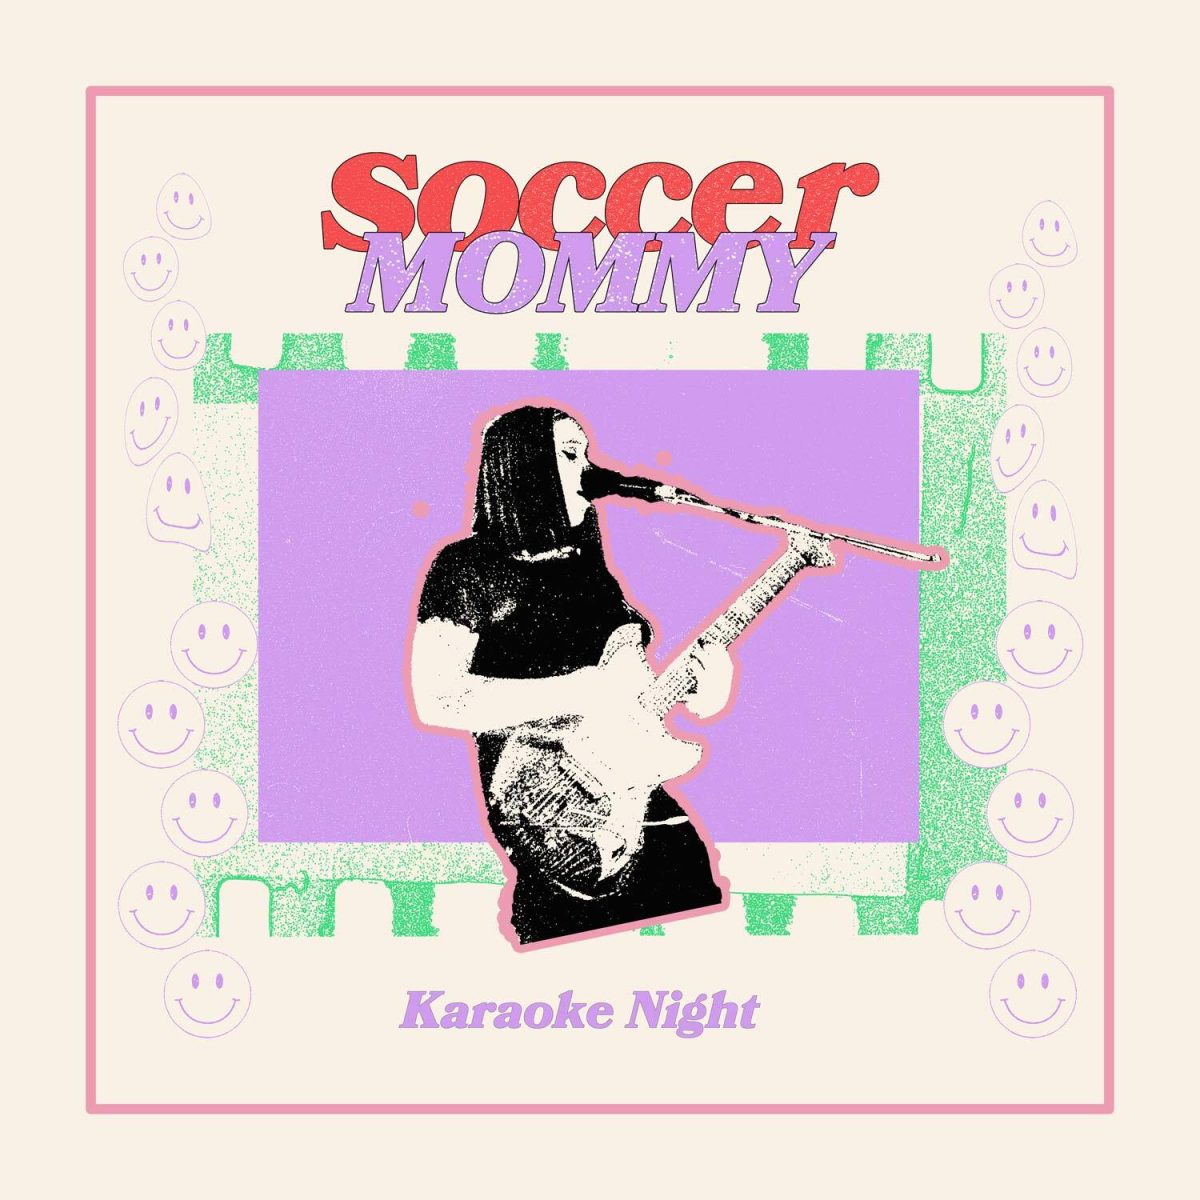 Soccer+Mommy+gives+classic+hits+new+meaning+with+%E2%80%98Karaoke+Night%E2%80%99